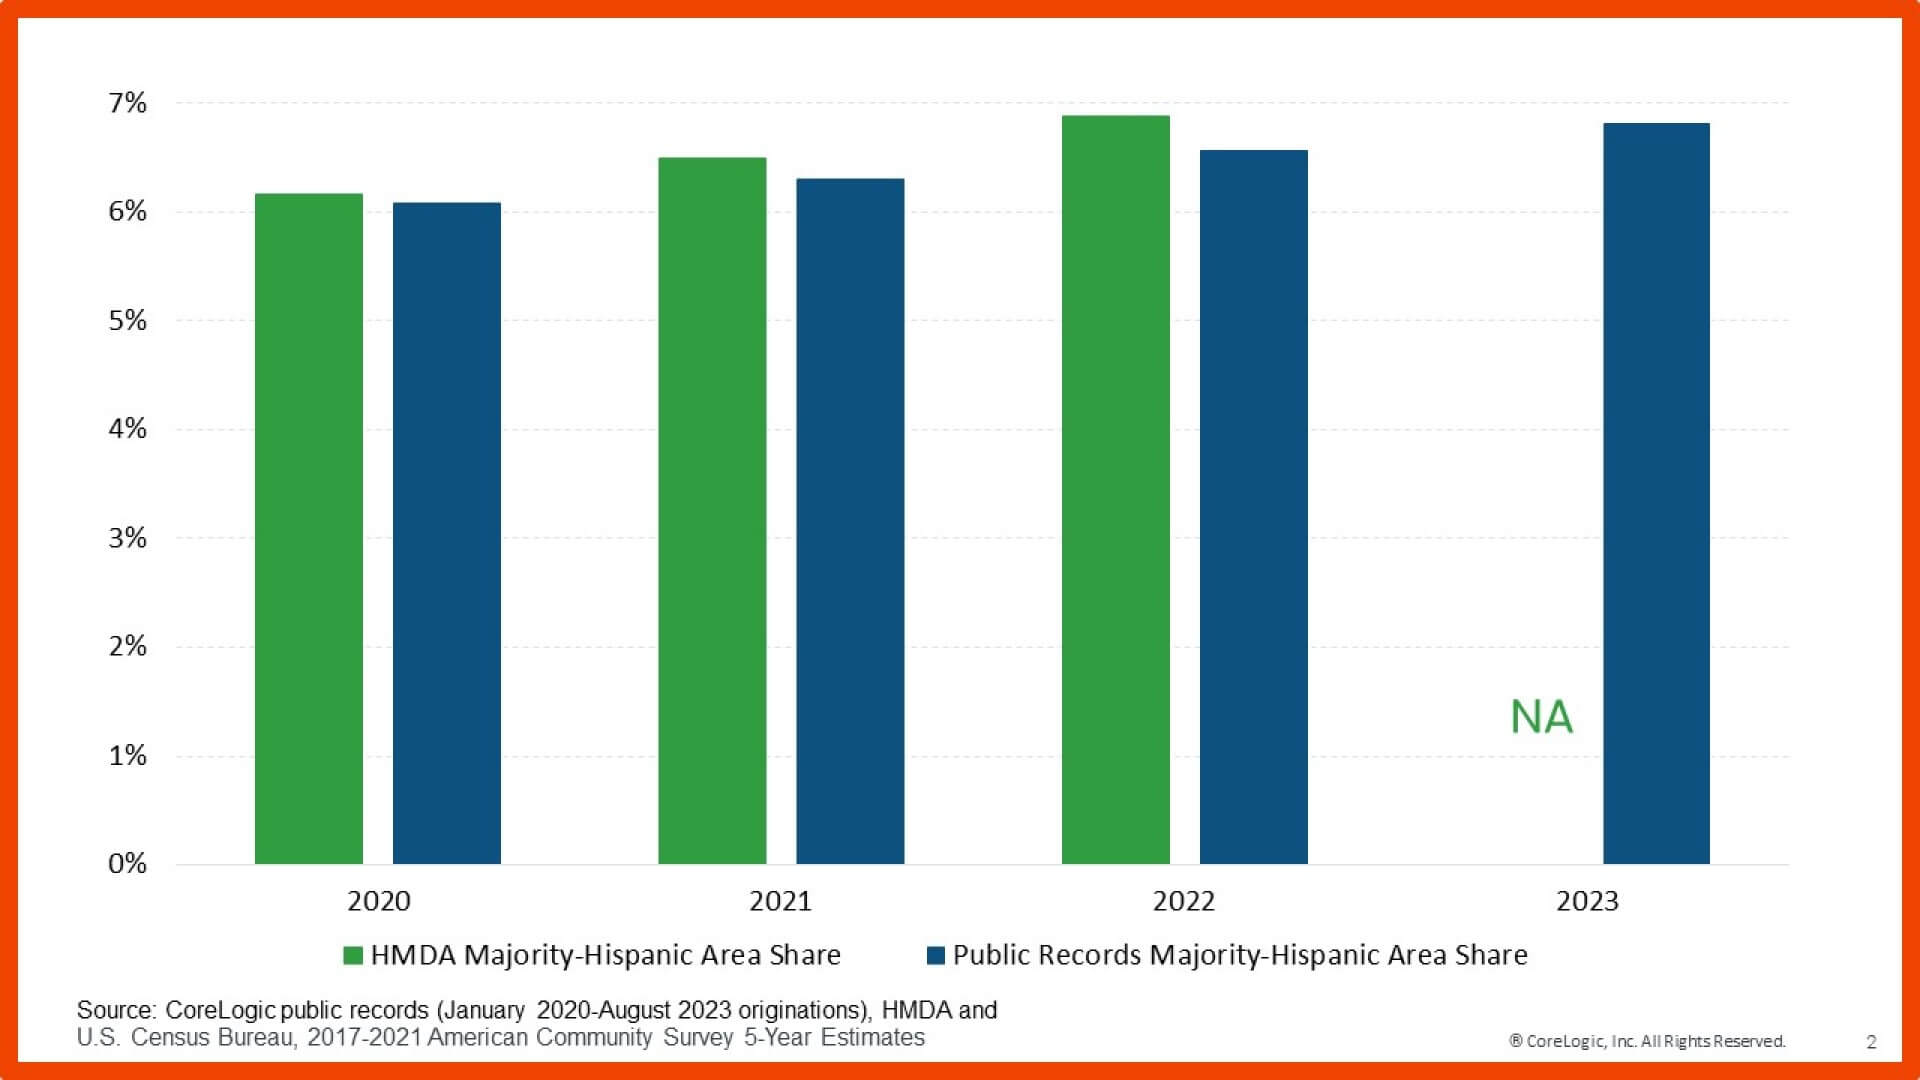 Share of first-lien, home purchase loans in majority-Hispanic census tracts